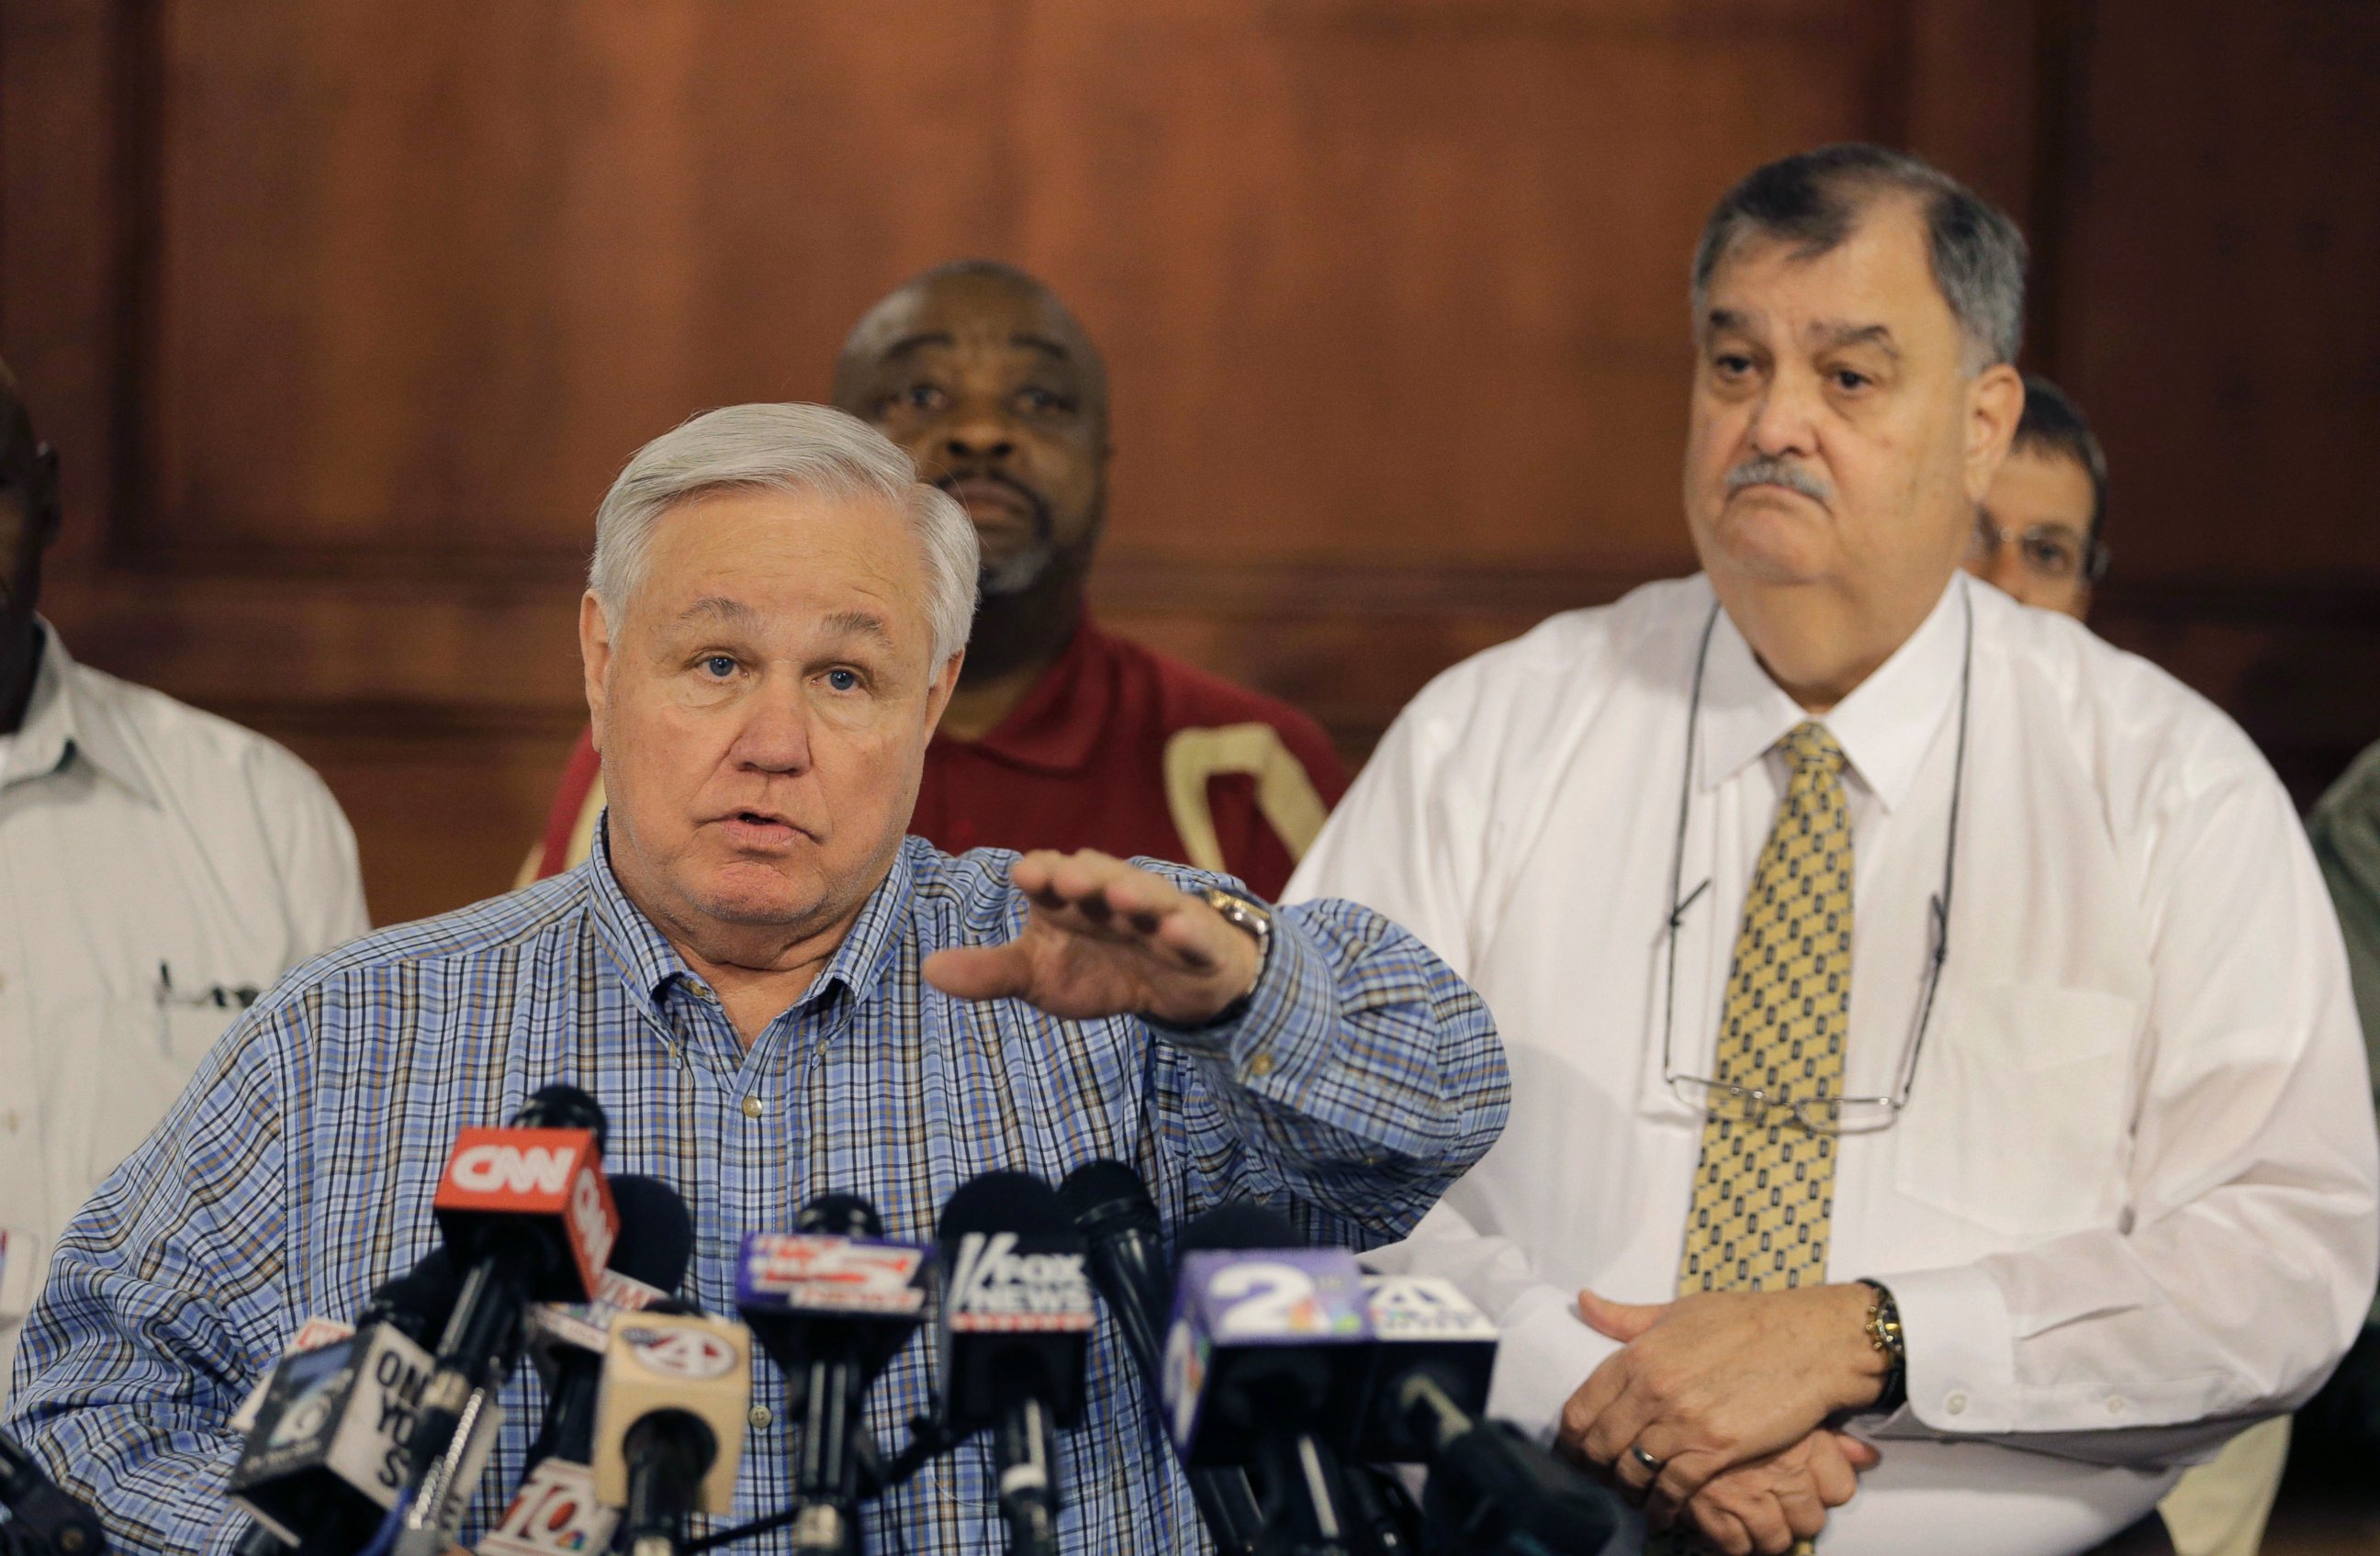 PHOTO: Mayor Keith Summey, left, answers a question about the shooting death of Walter Scott as Police Chief Eddie Driggers, right, listens during a news conference at city hall in North Charleston, S.C., April 8, 2015.